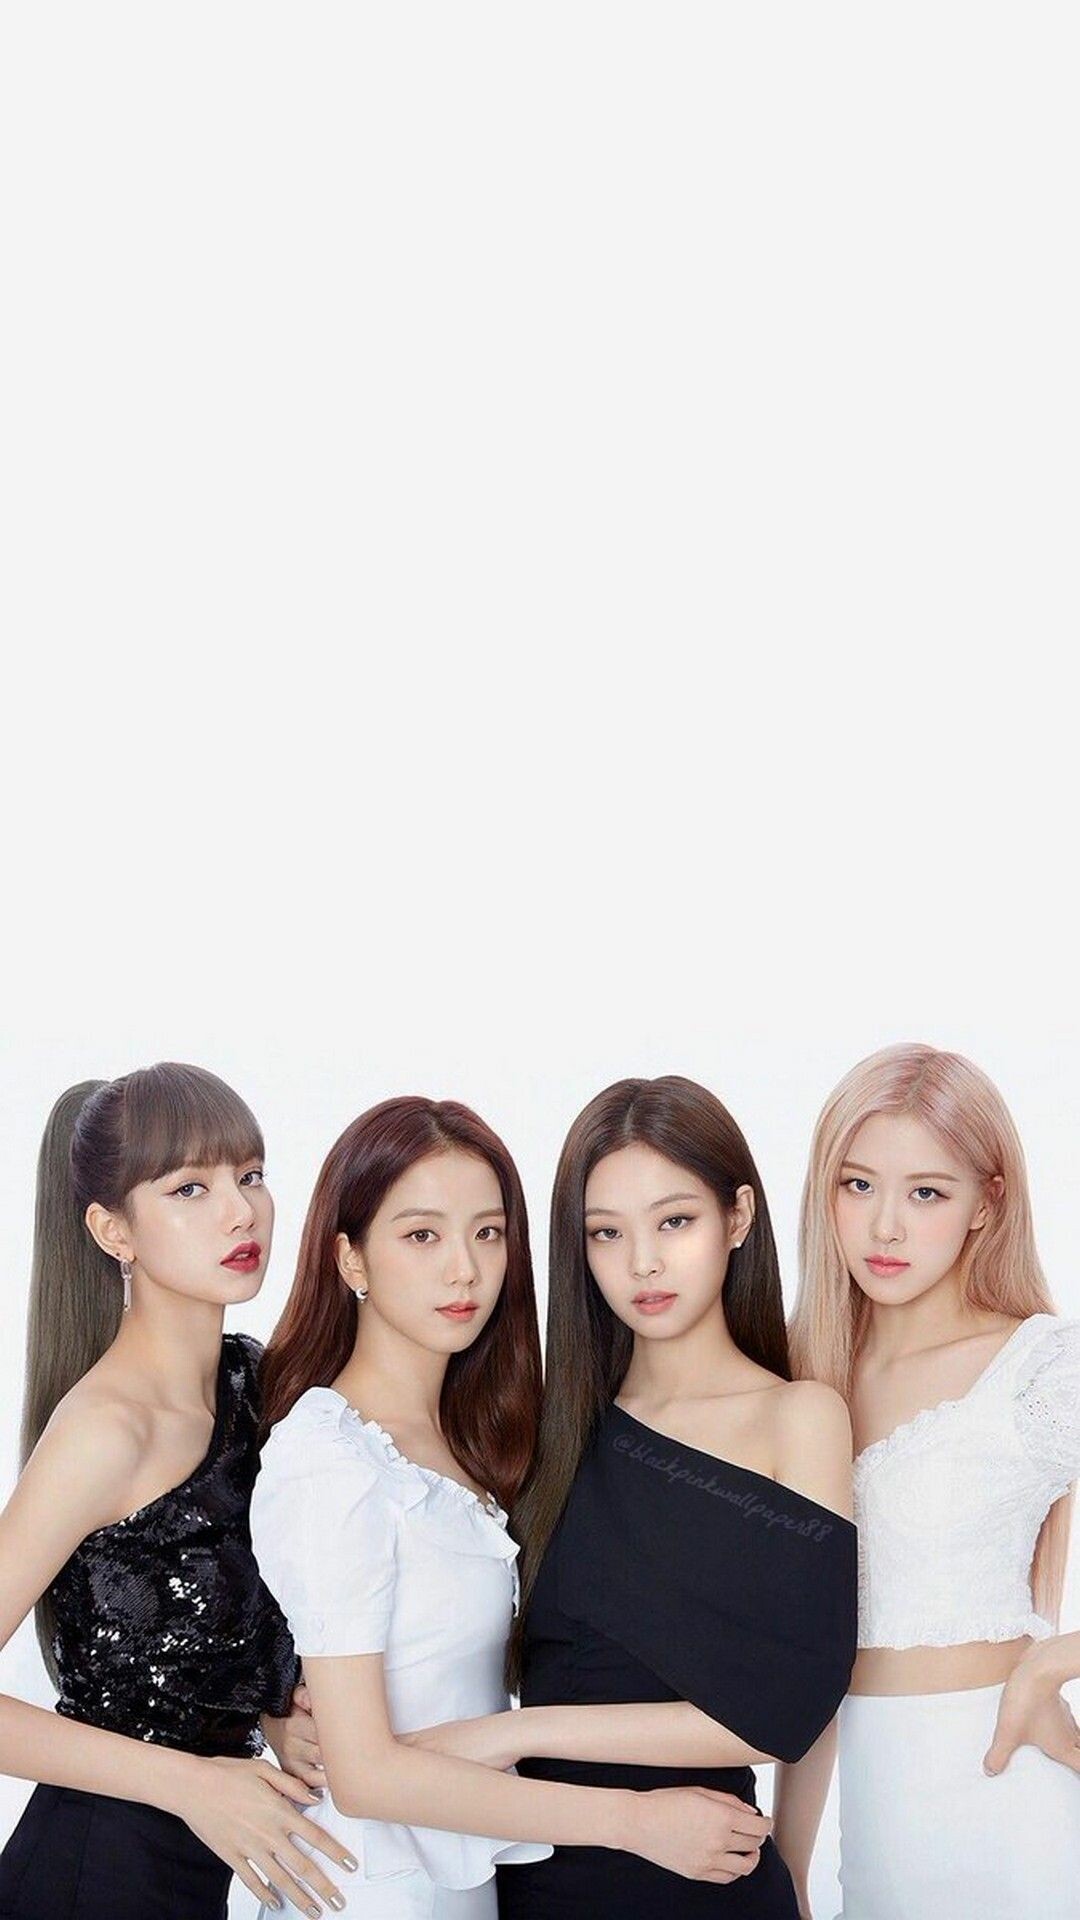 BLACKPINK: The first girl group to debut under YG Entertainment in seven years. 1080x1920 Full HD Wallpaper.